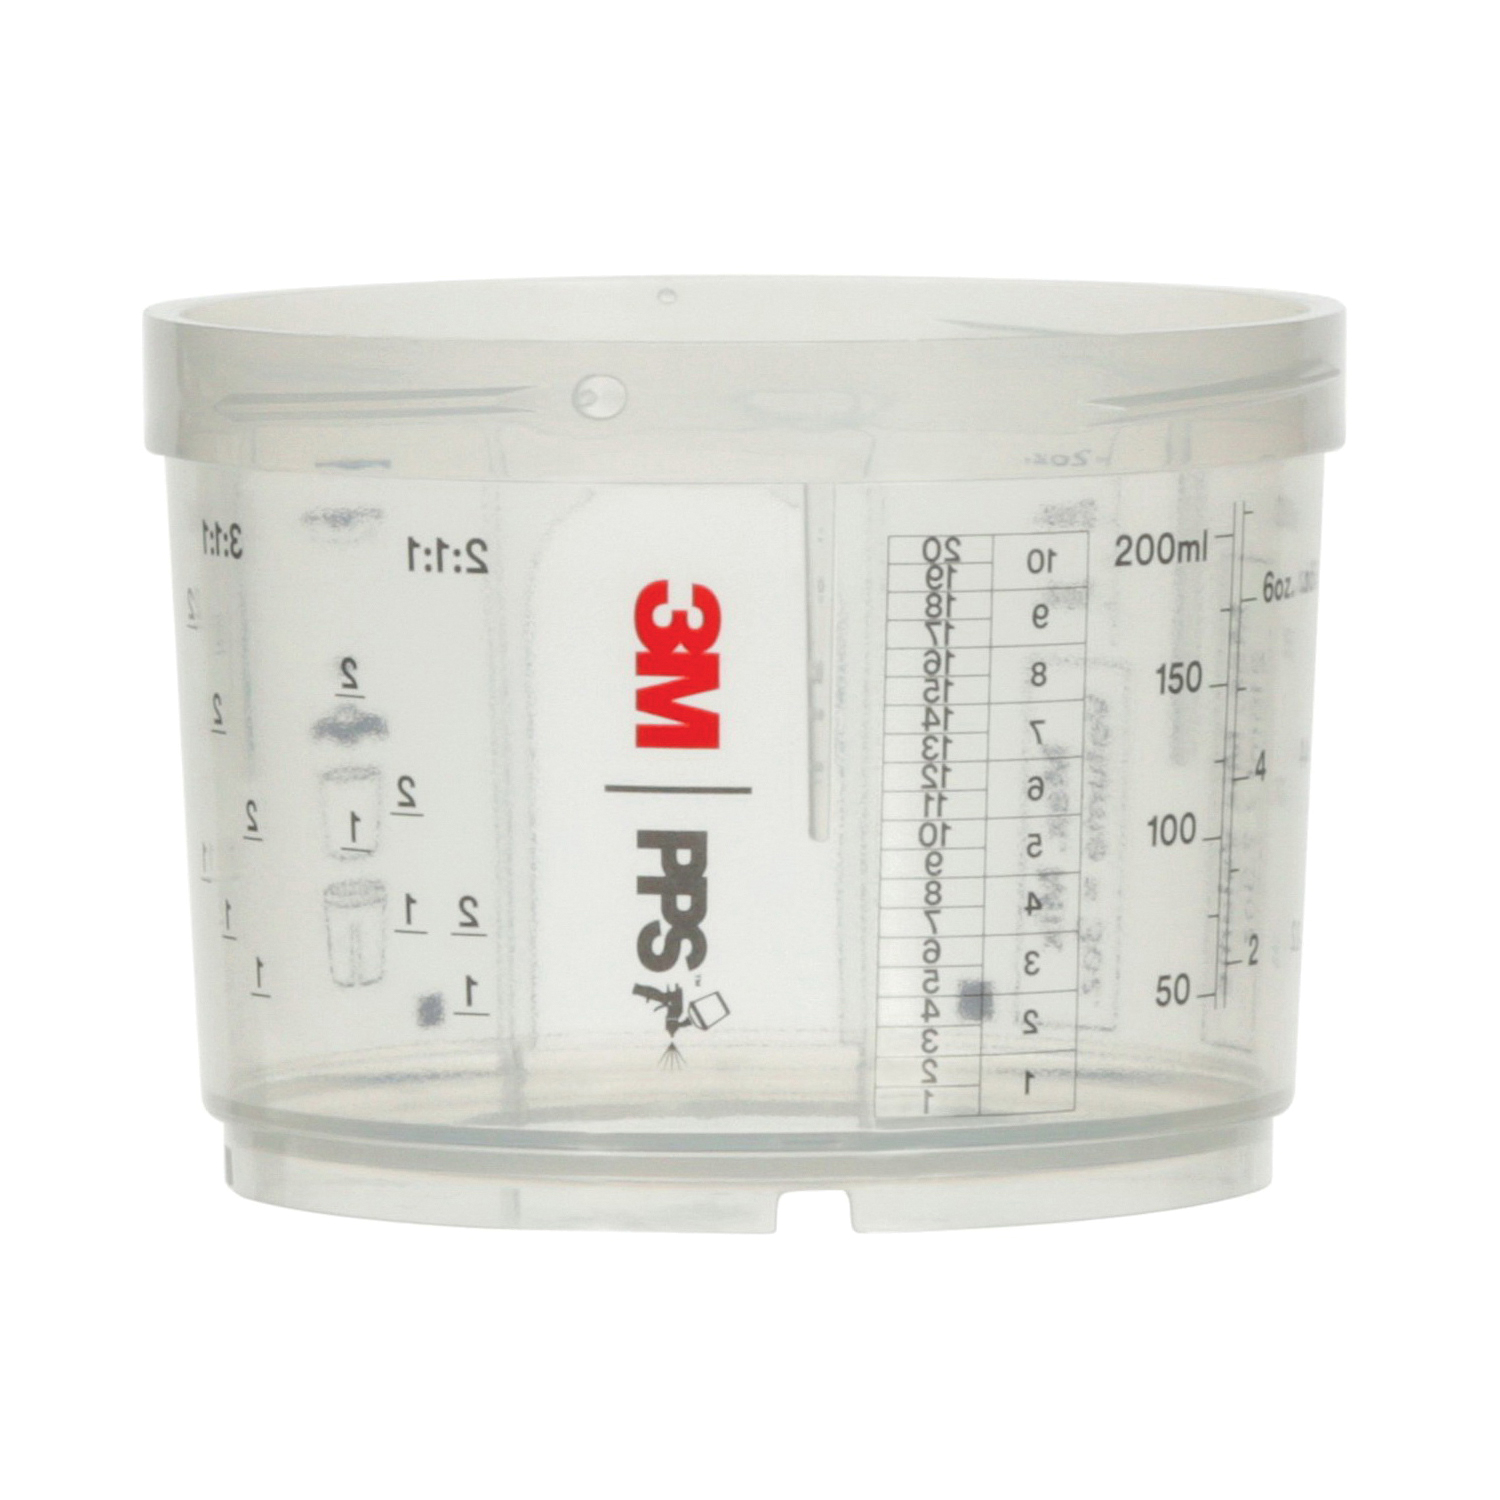 3M™ PPS™ 051131-16122 Midi Cup and Collar, 400 mL Container, For Use With 3M™ PPS™ Paint Preparation System